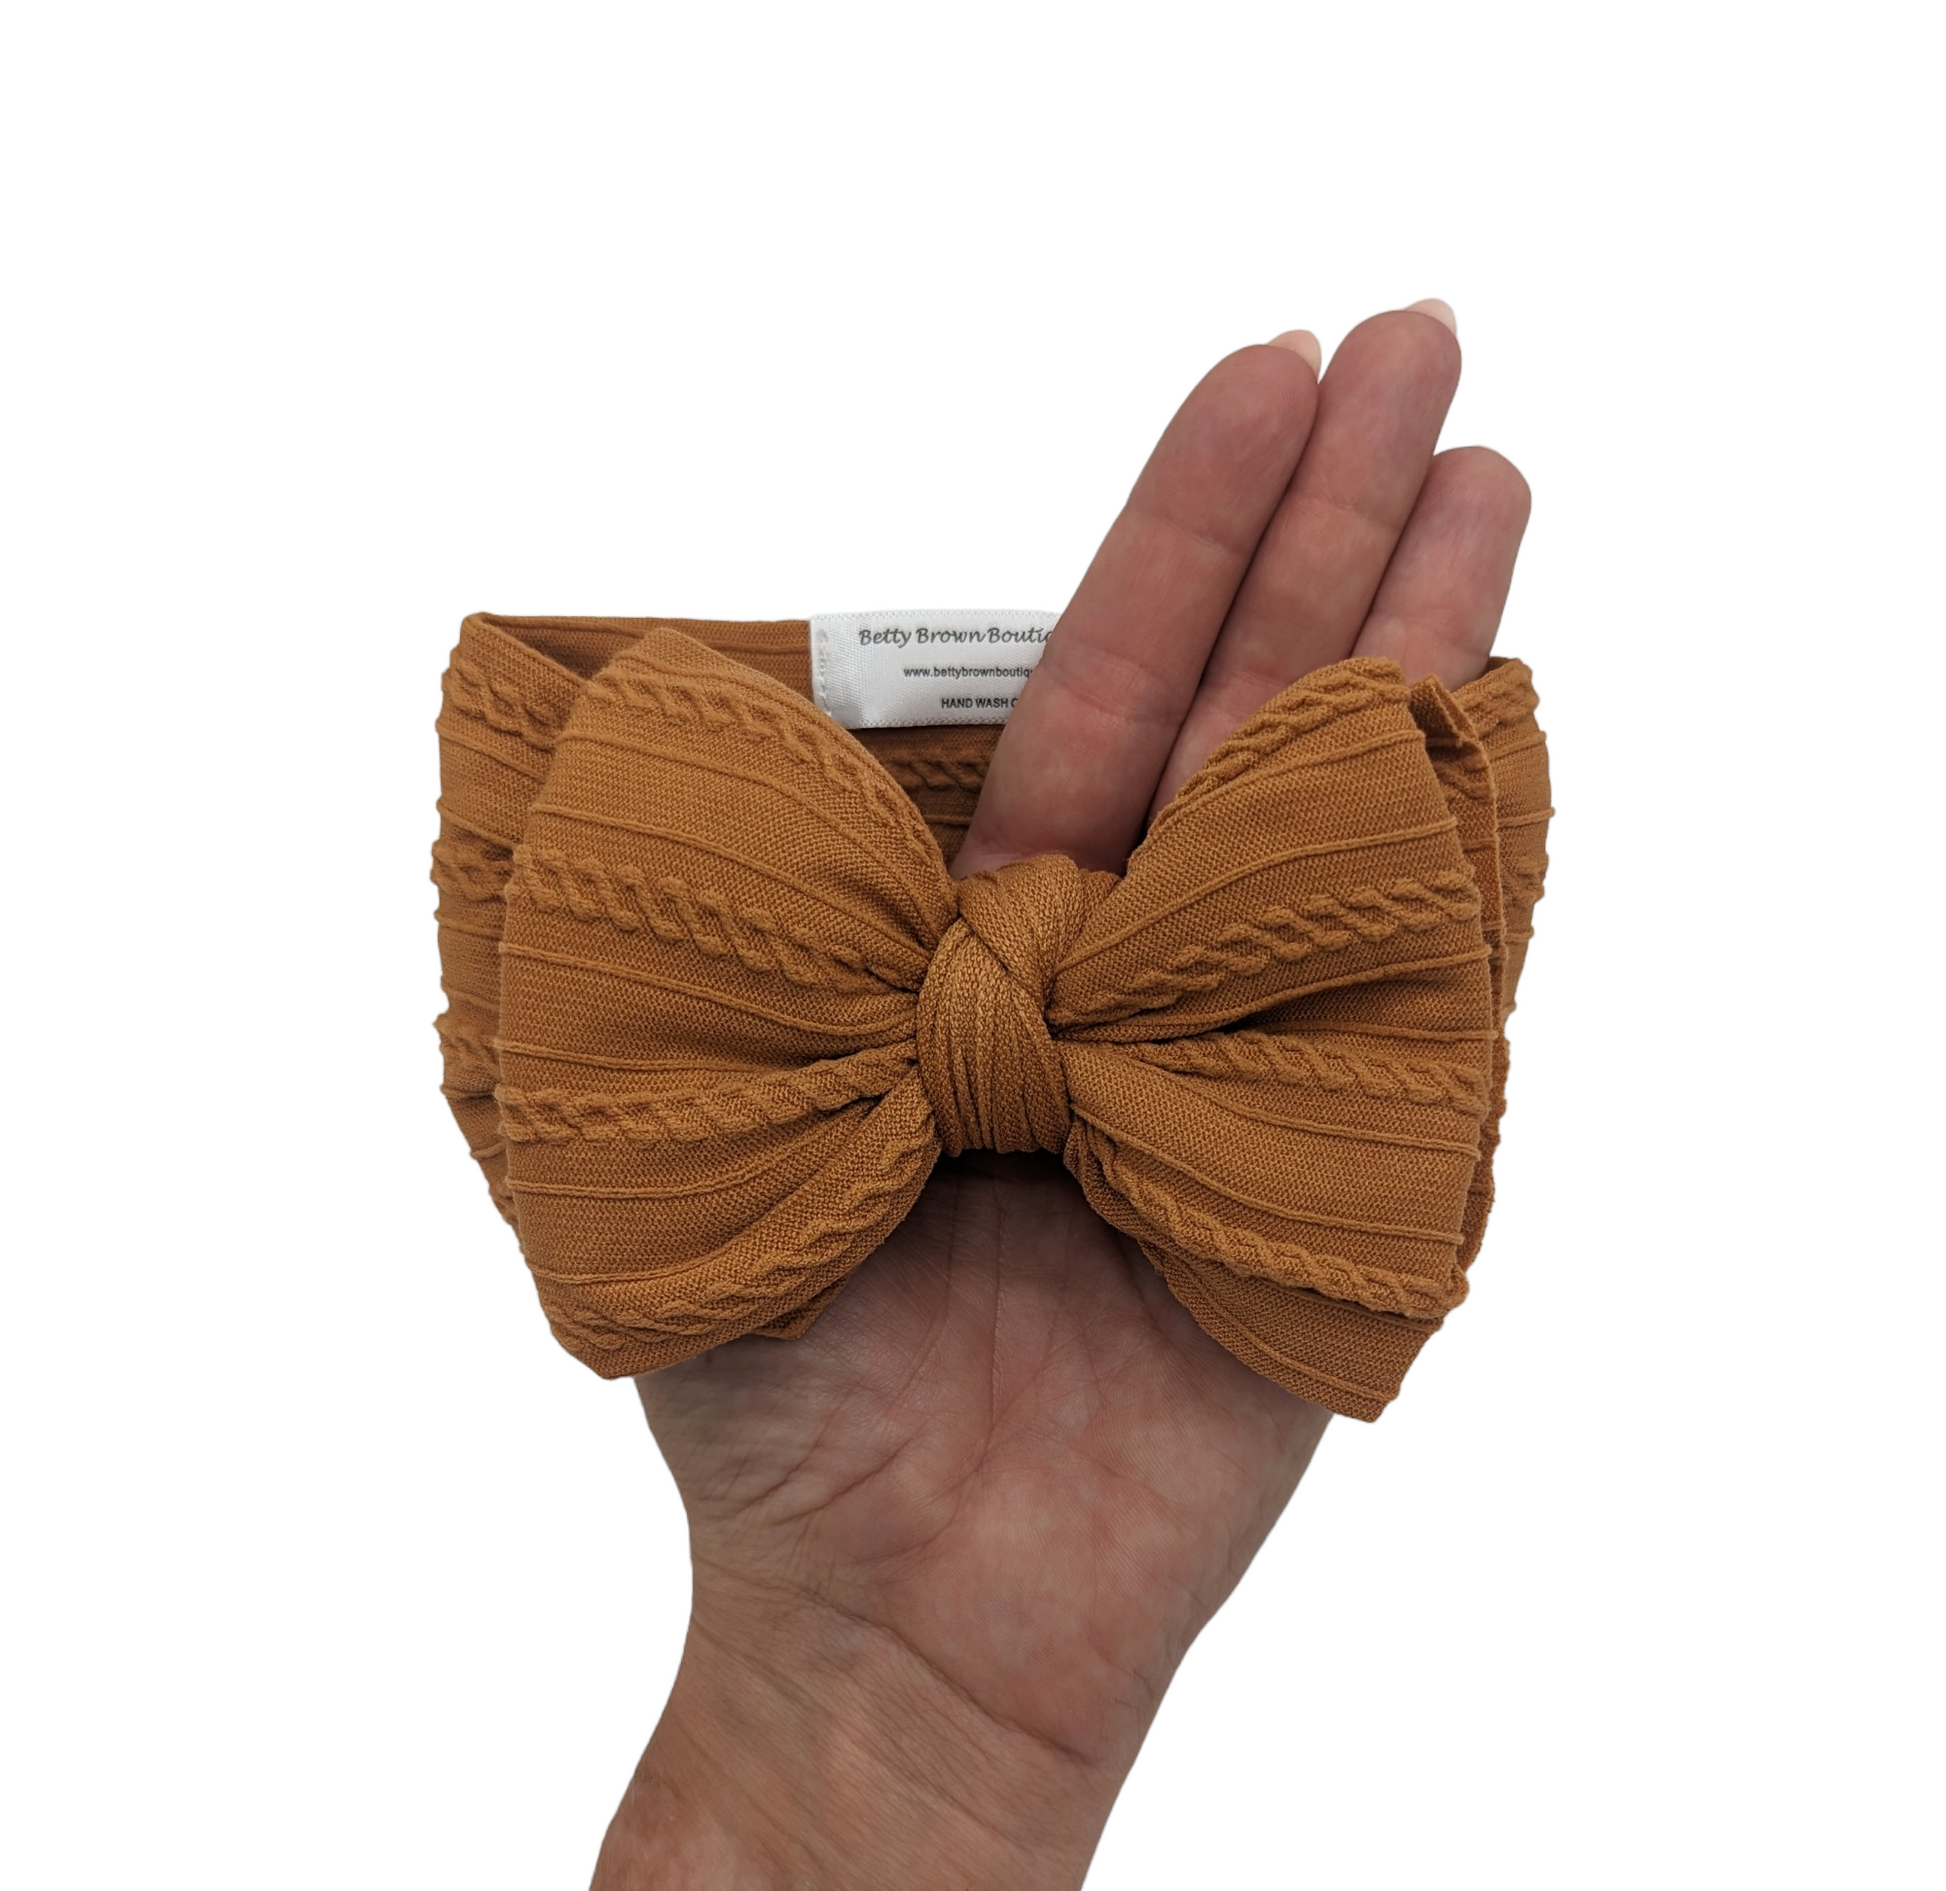 Ginger Larger Bow Cable Knit Headwrap - Betty Brown Boutique Ltd